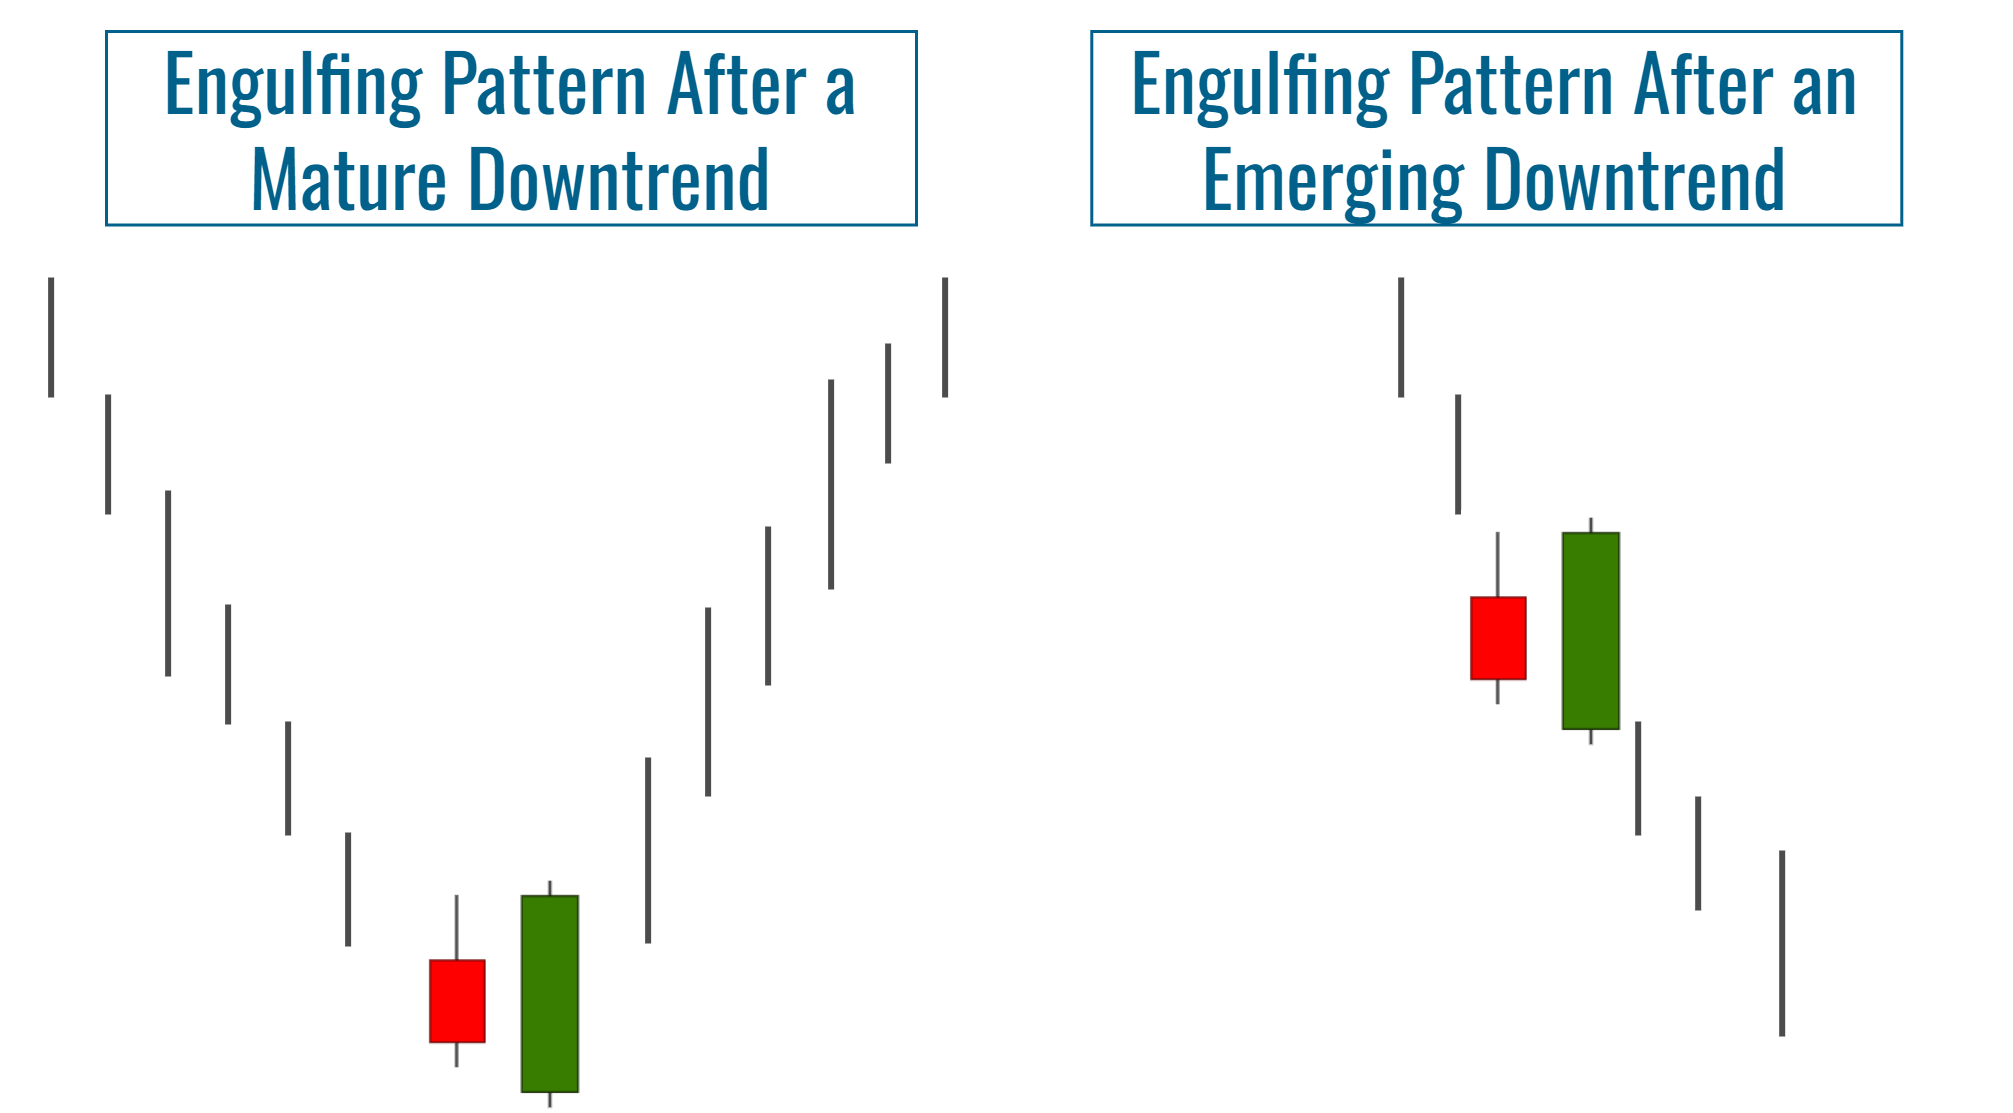 Engulfing Pattern: Dependence on Context